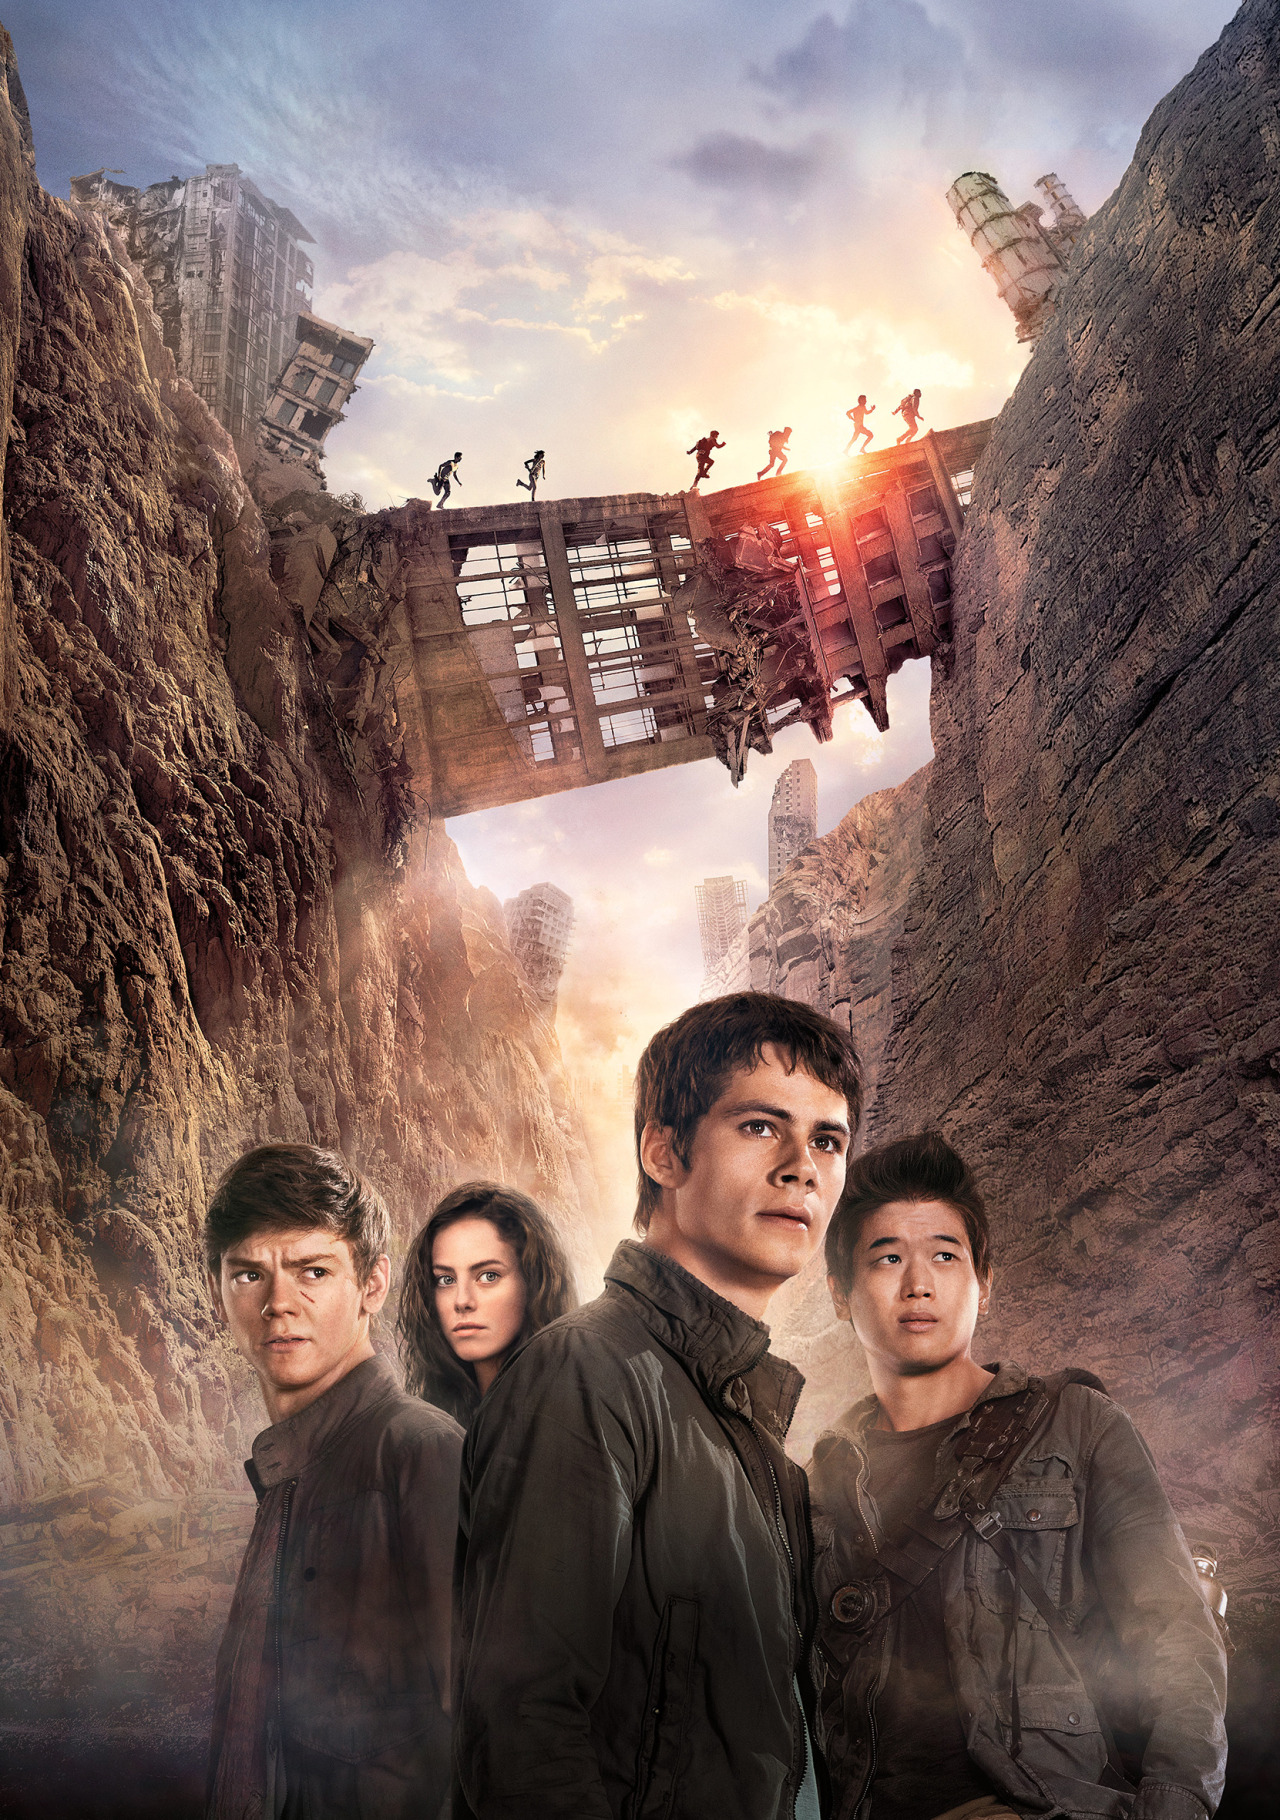 Dylan O'Brien As Thomas Maze Runner The Death Cure Jacket